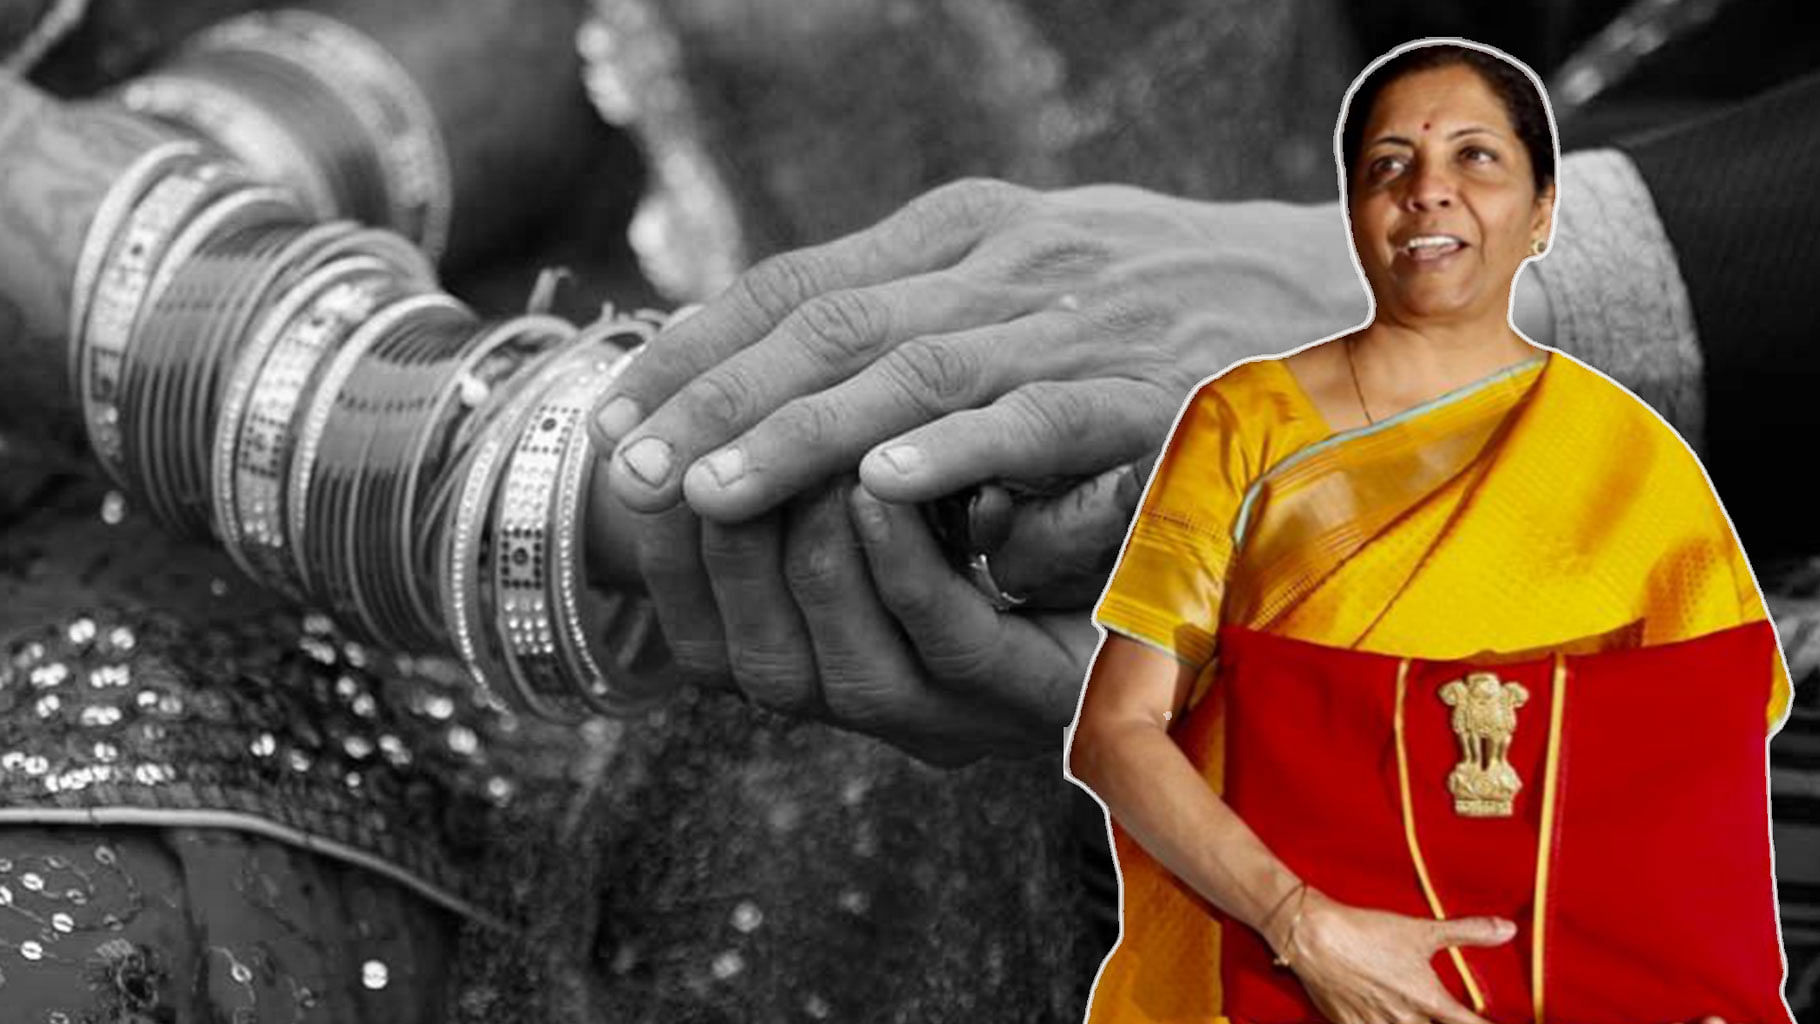 Finance Minister Nirmala Sitharaman proposed the allocation of Rs 28,600 crore for programmes related to women’s welfare.